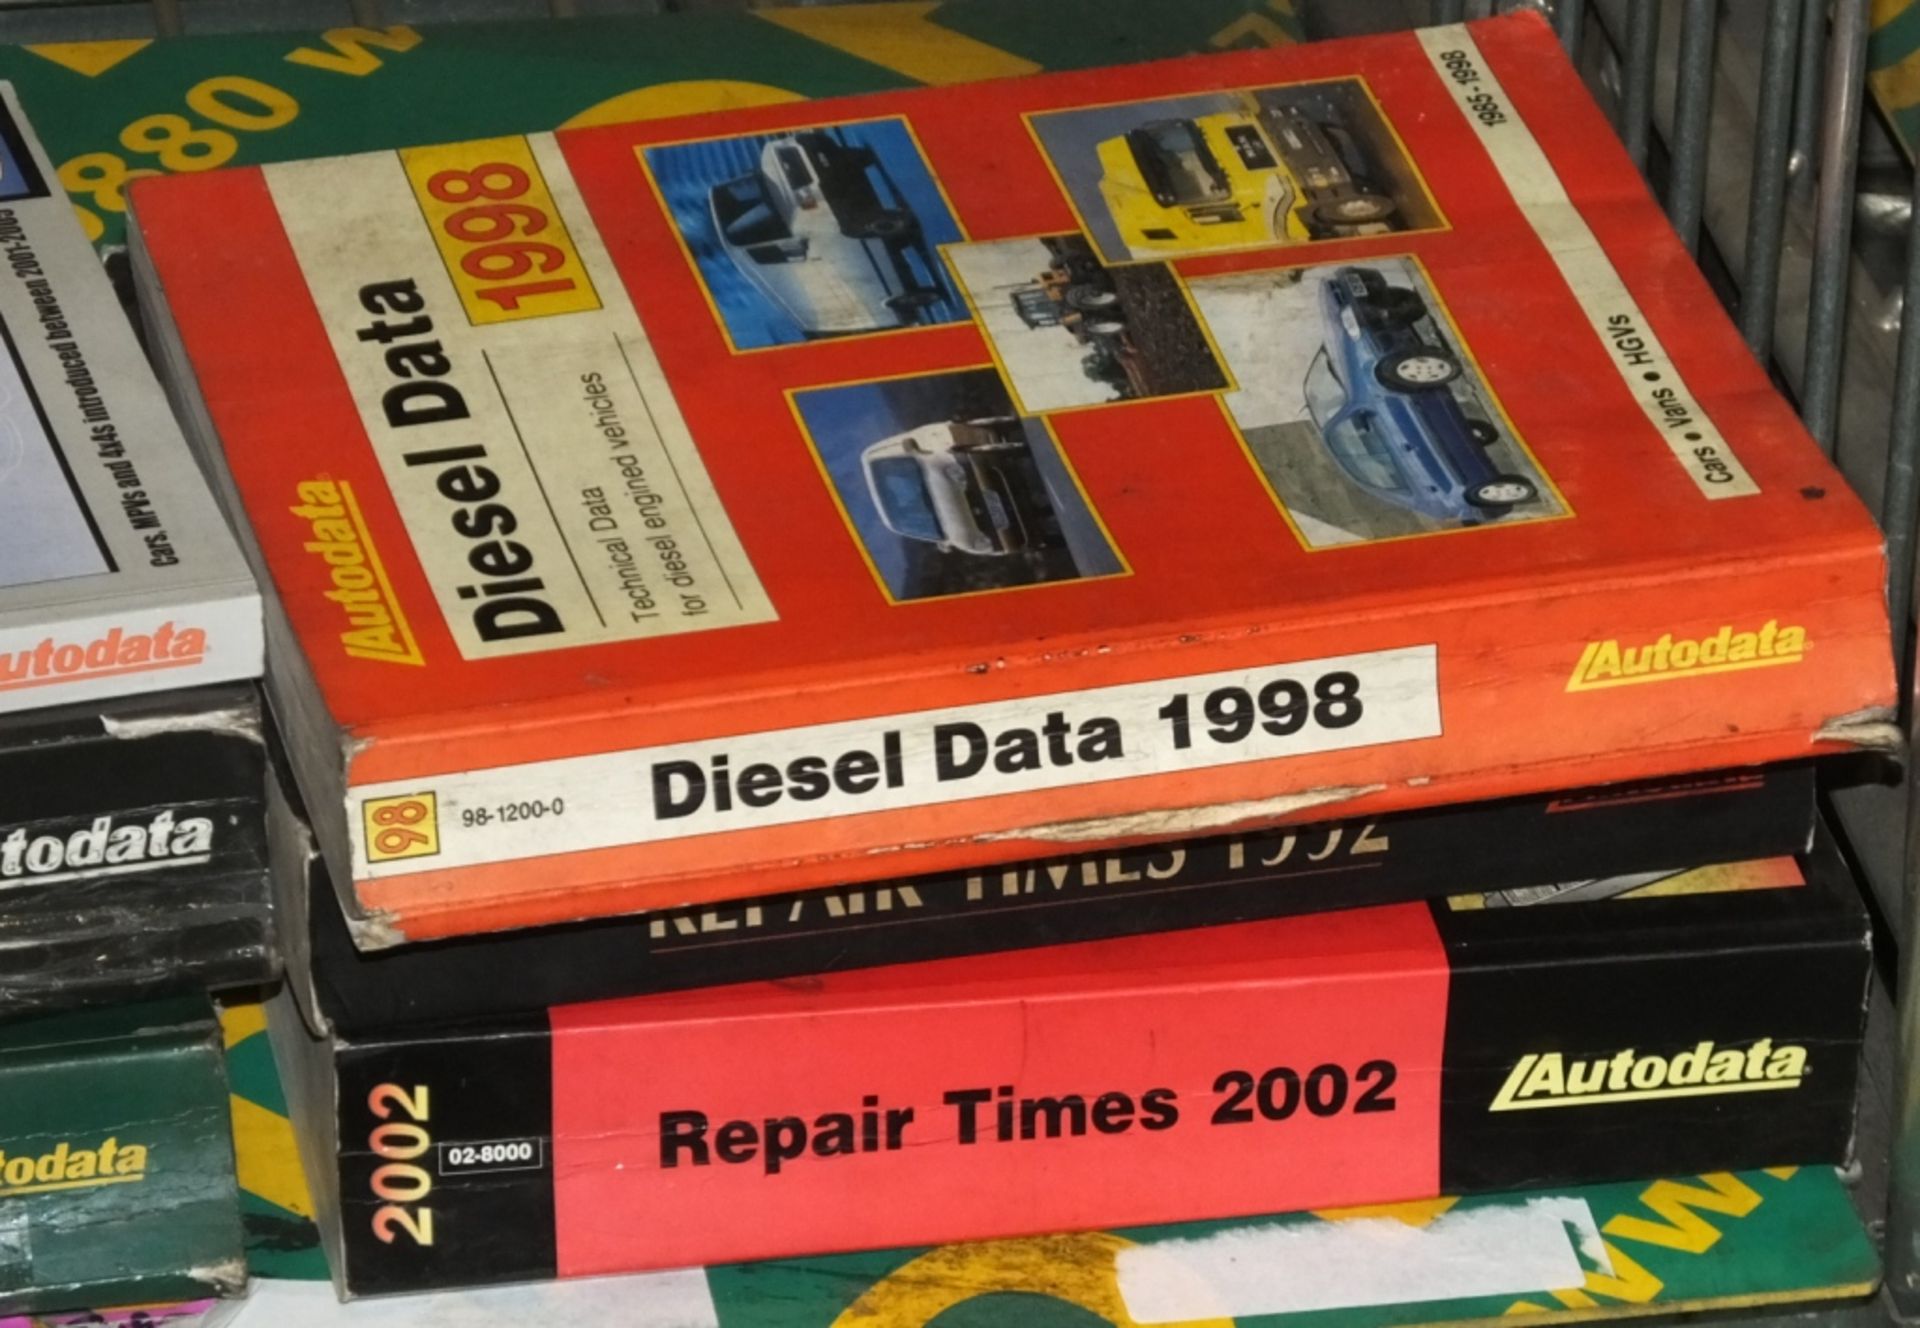 9x Autodata Vehicle Repair Manuals 1992 - 2005 - Timing Belts, Diesel Data, Technical Data - Image 2 of 4